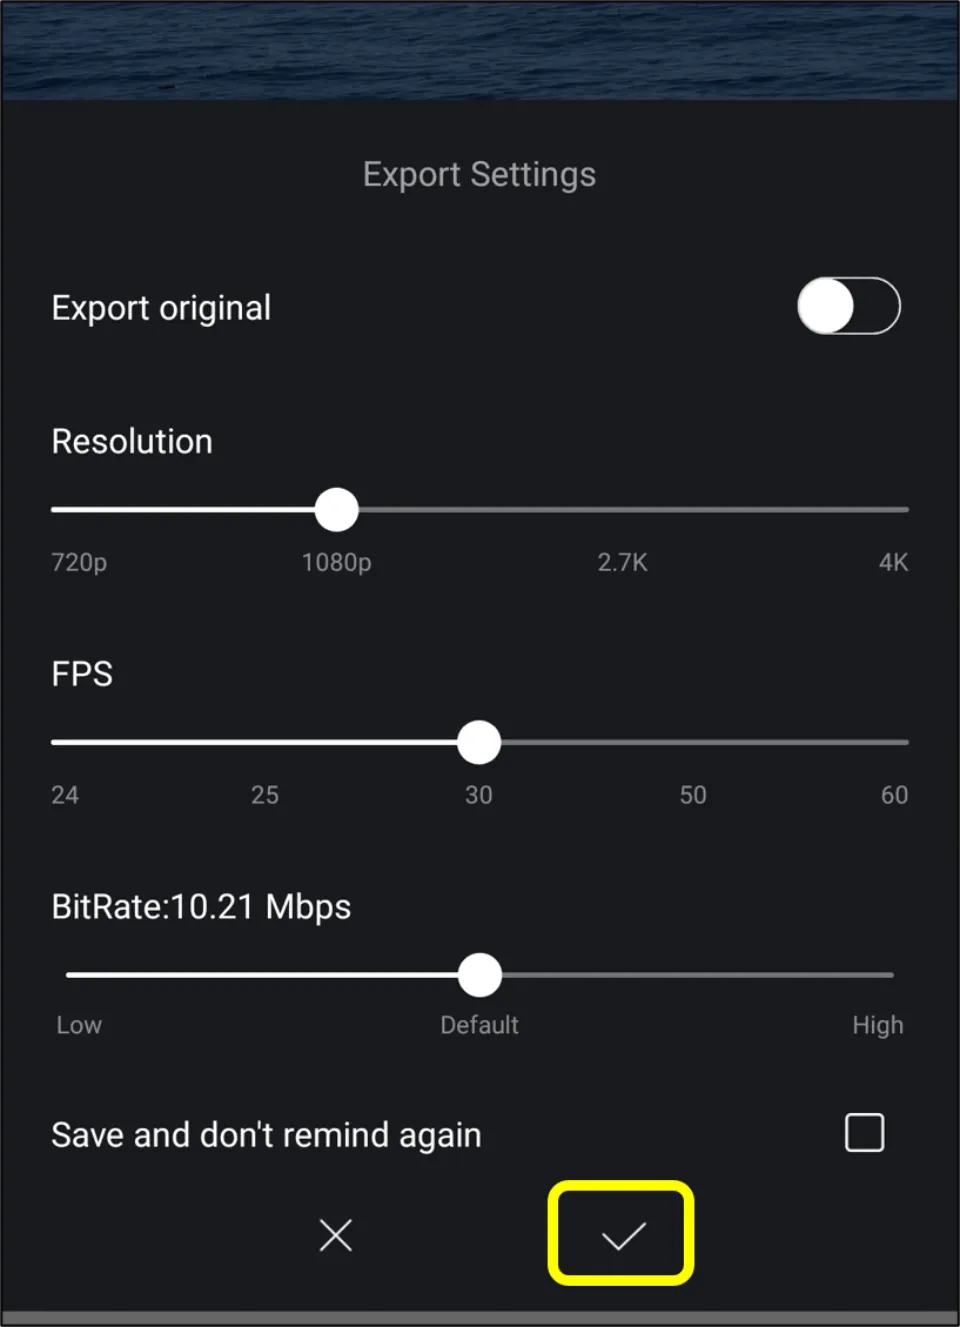 Choose Resolution, FPS, and bitrate. Then, click ✓